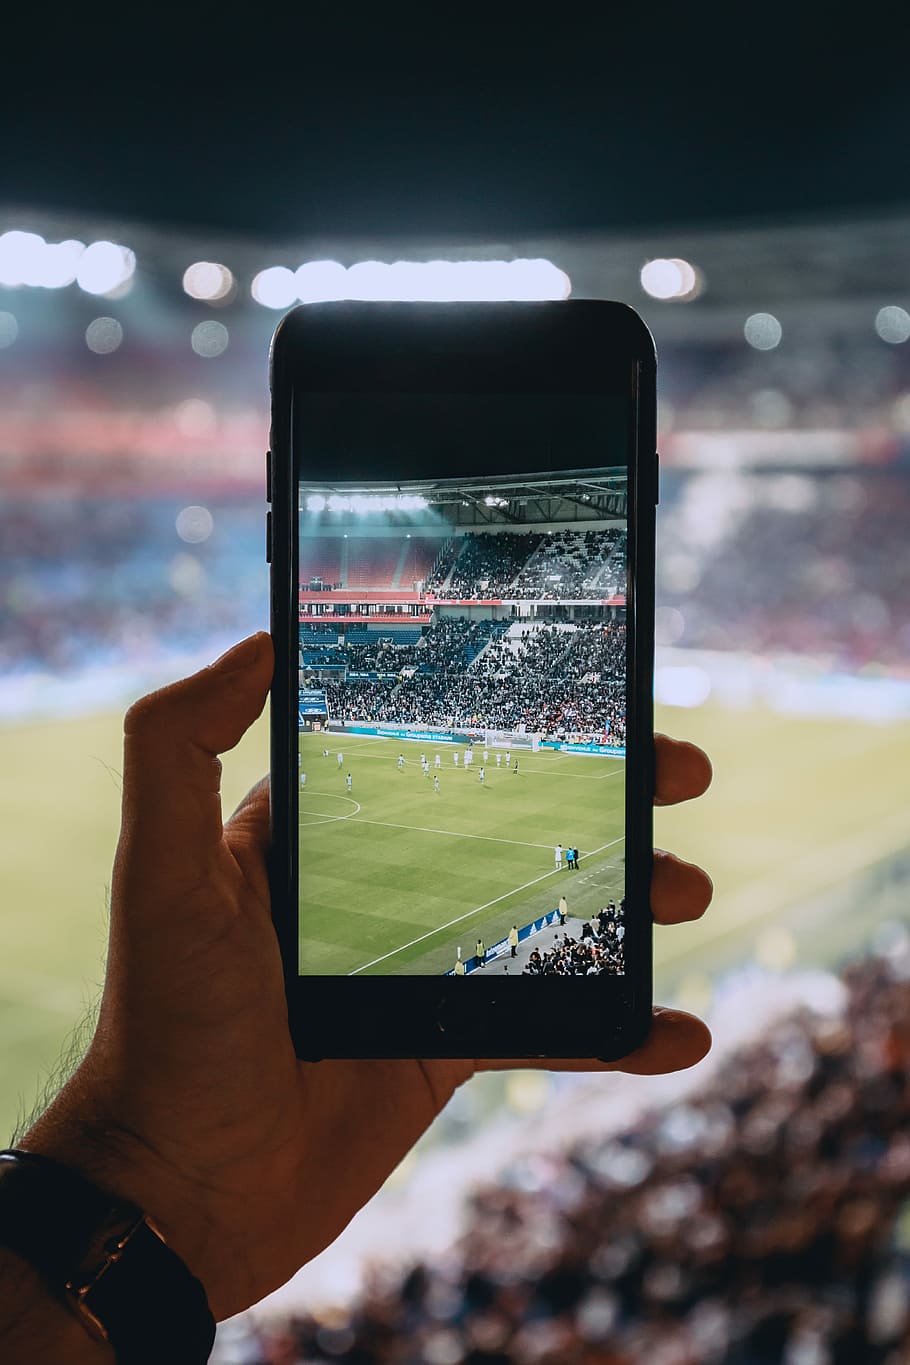 HD wallpaper: person taking photo using black smartphone, focus photography  of person taking photo of soccer players using iPhone | Wallpaper Flare